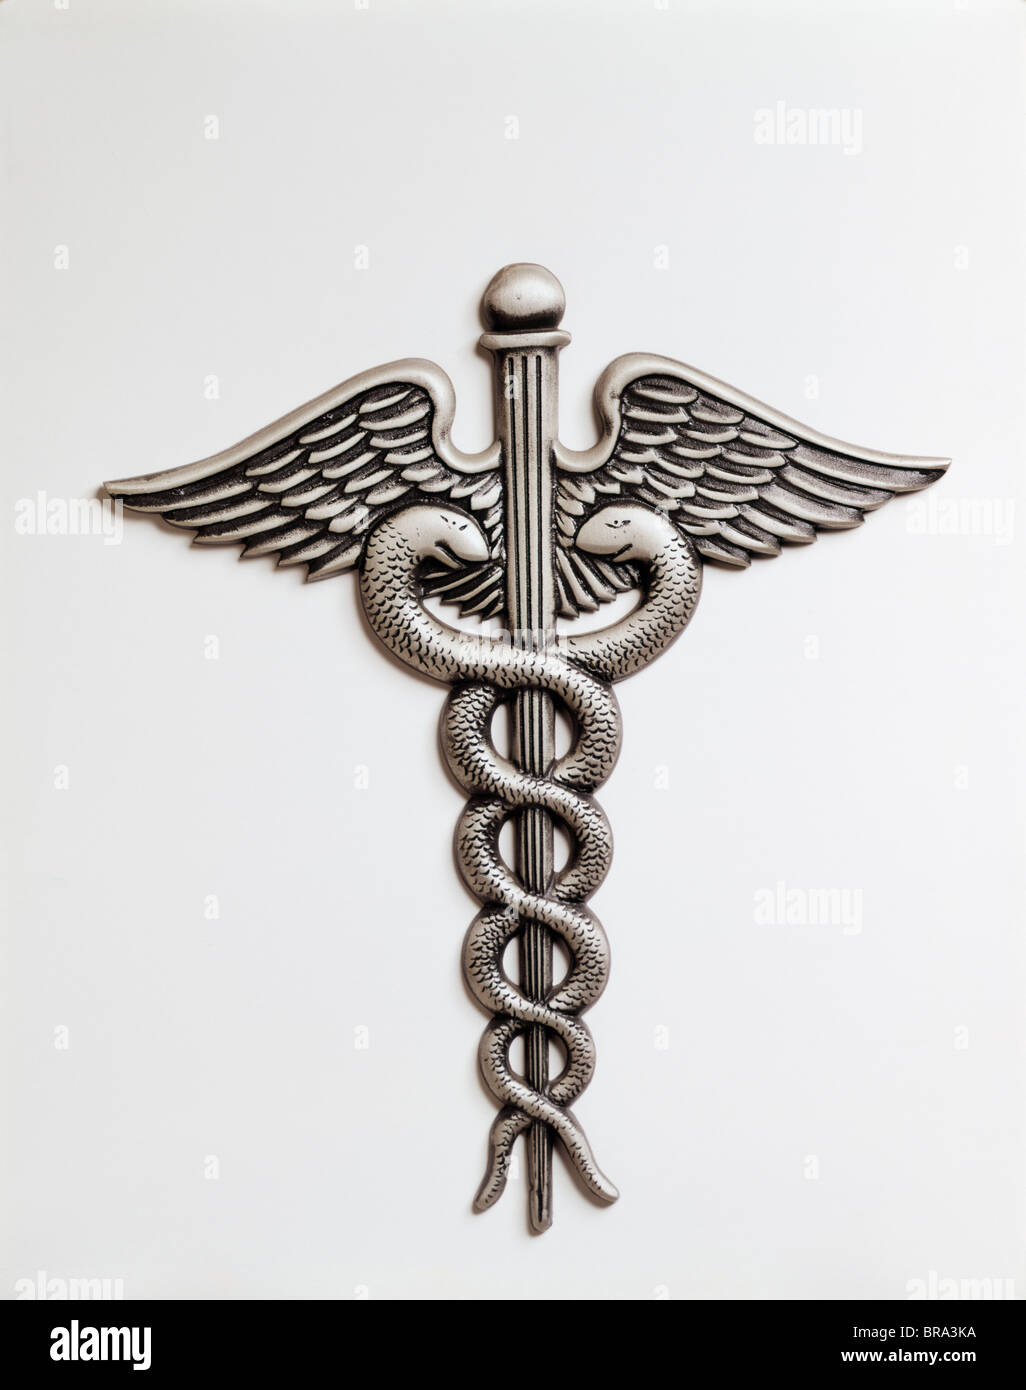 CADUCEUS AN INSIGNIA OF HERMES WINGED STAFF TWINED WITH SERPENTS NOW THE SYMBOL OF THE MEDICAL PROFESSION Stock Photo